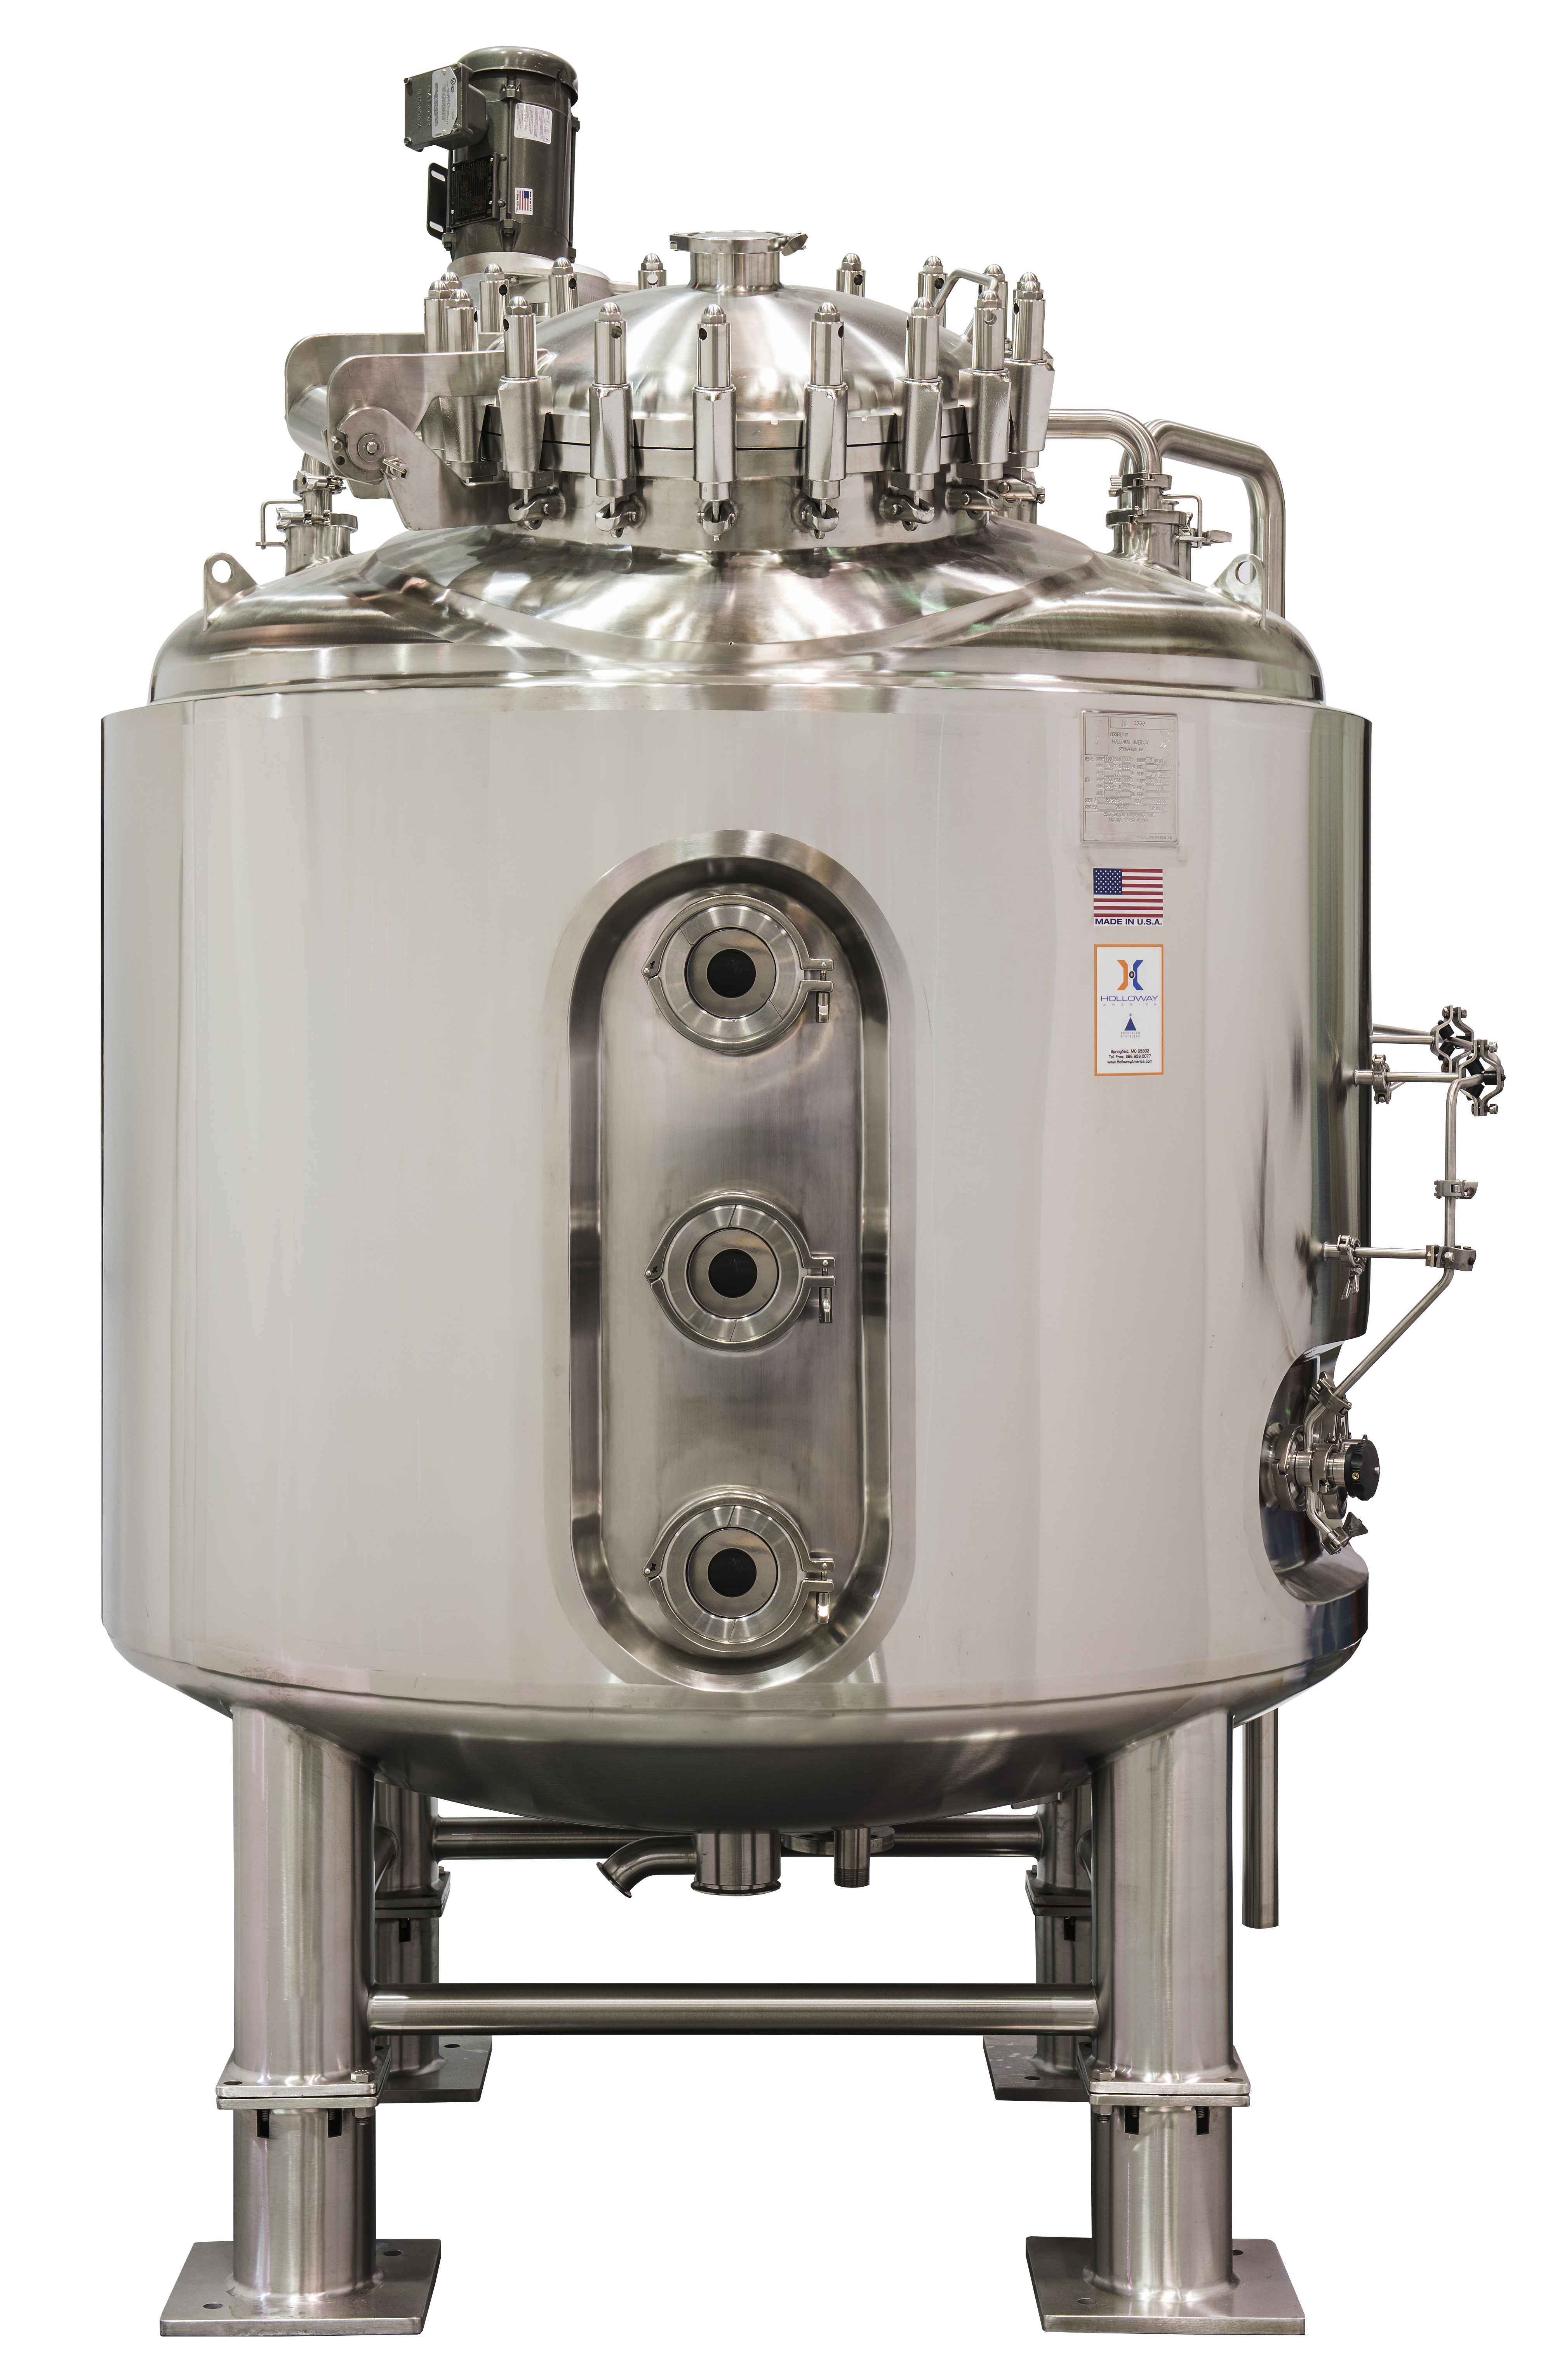 Mixing tank contents can be accessed from the top, like in this mix tank by Holloway.